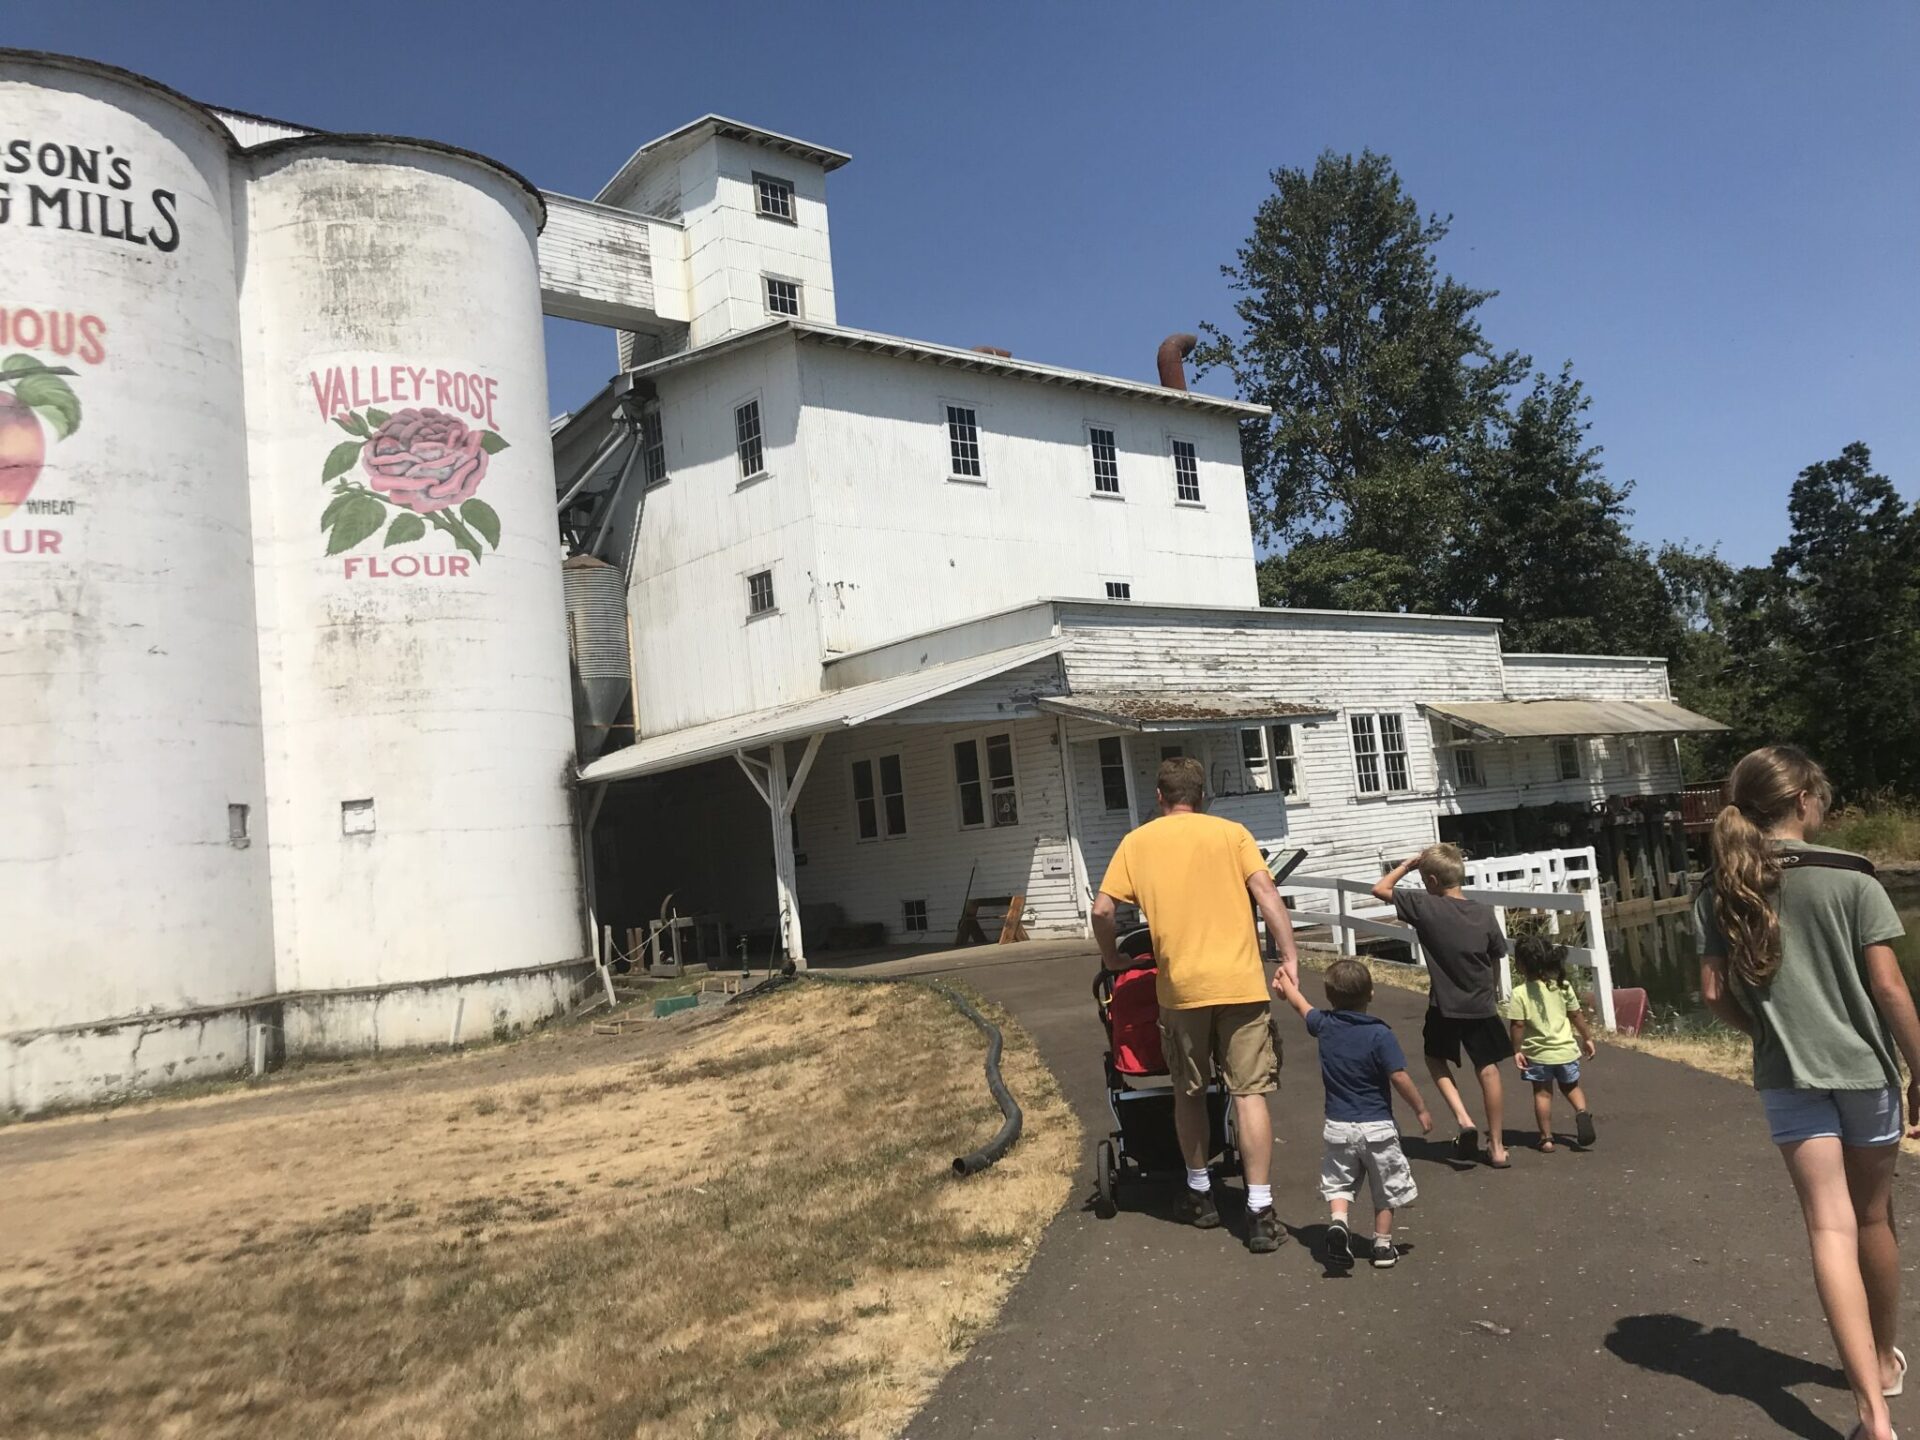 A family walks up the path to visit the Thompson Mill museum.